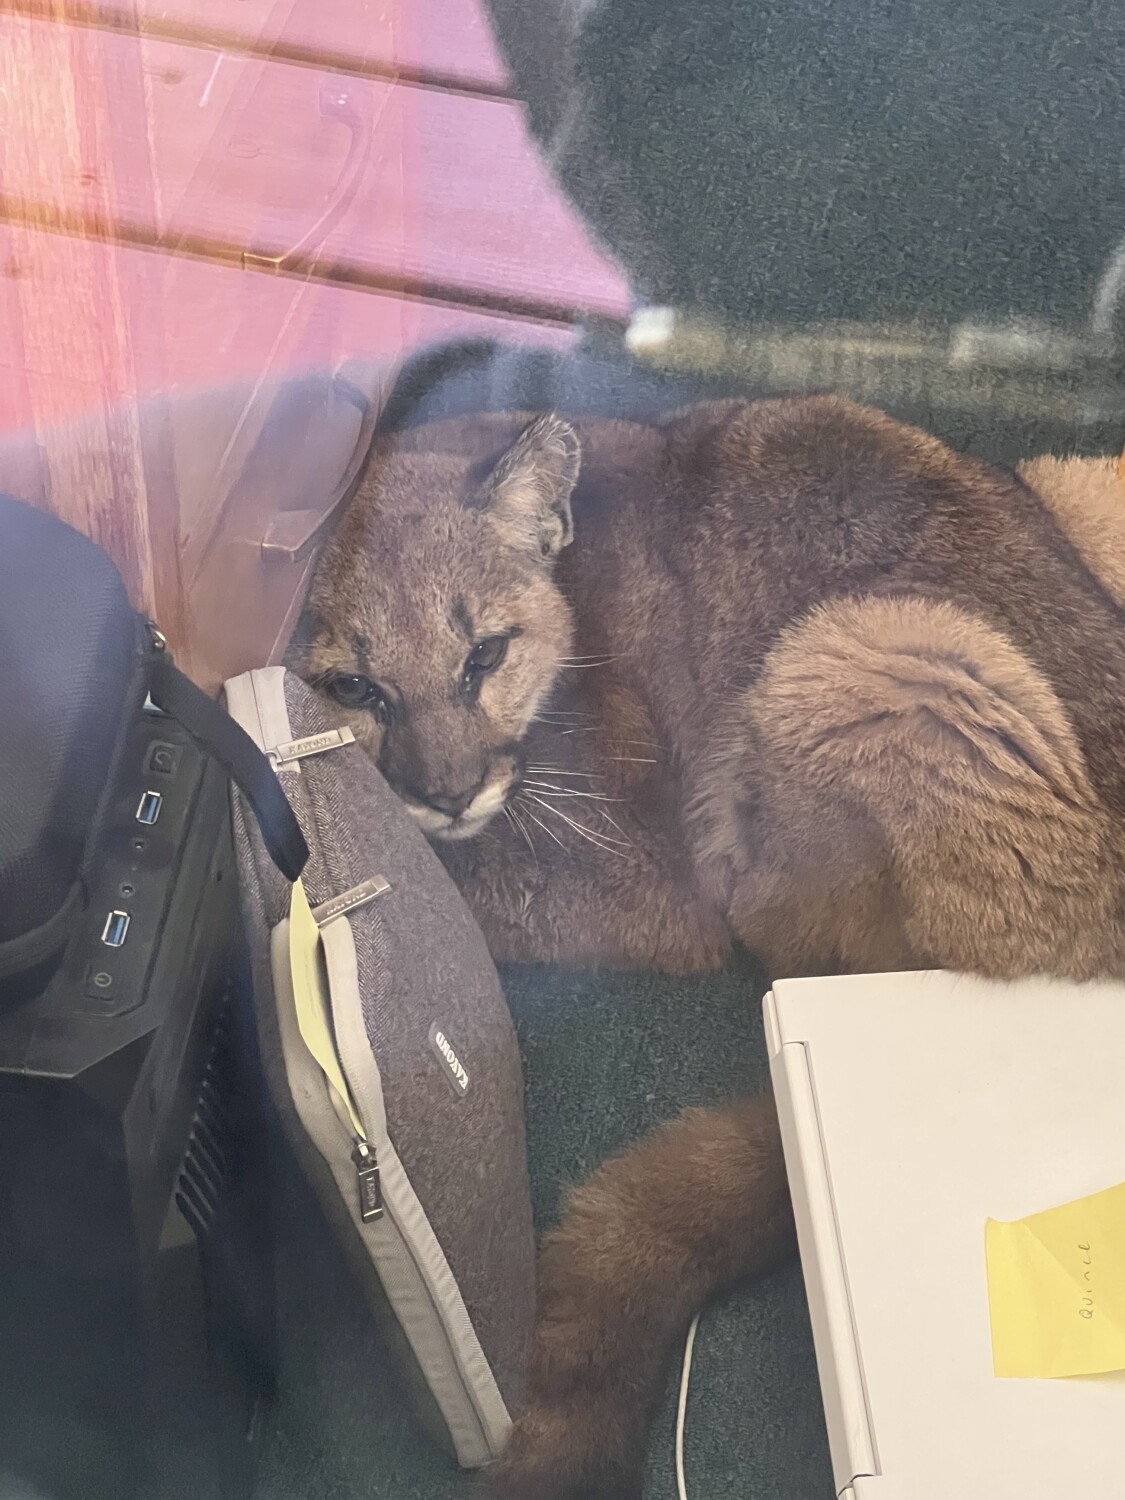 Students at San Mateo County school evacuated after mountain lion goes to class